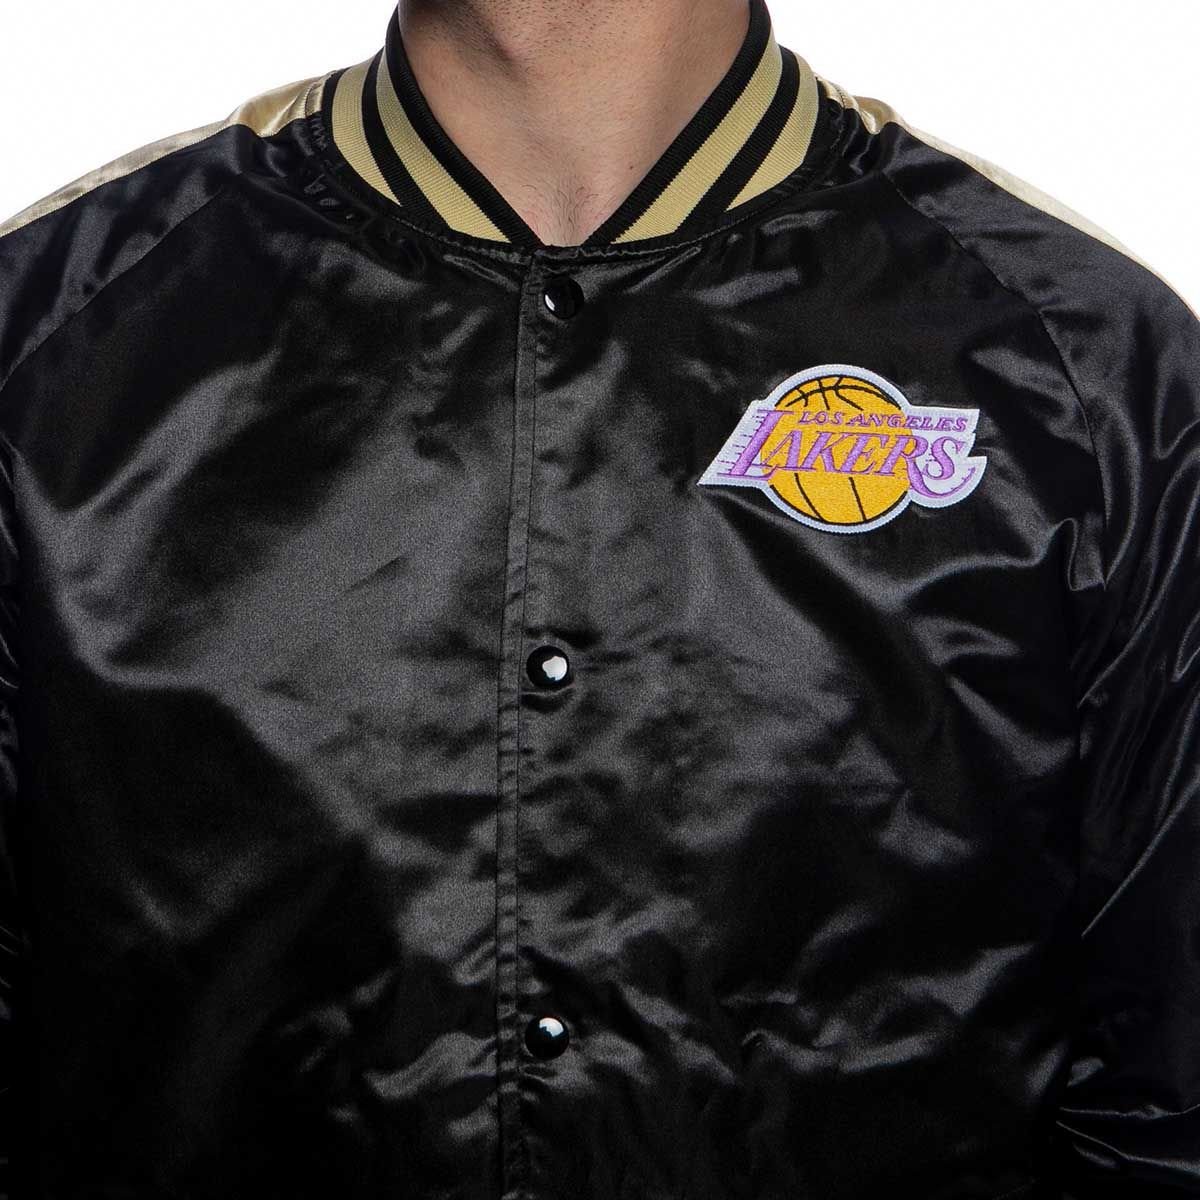 lakers gold jacket